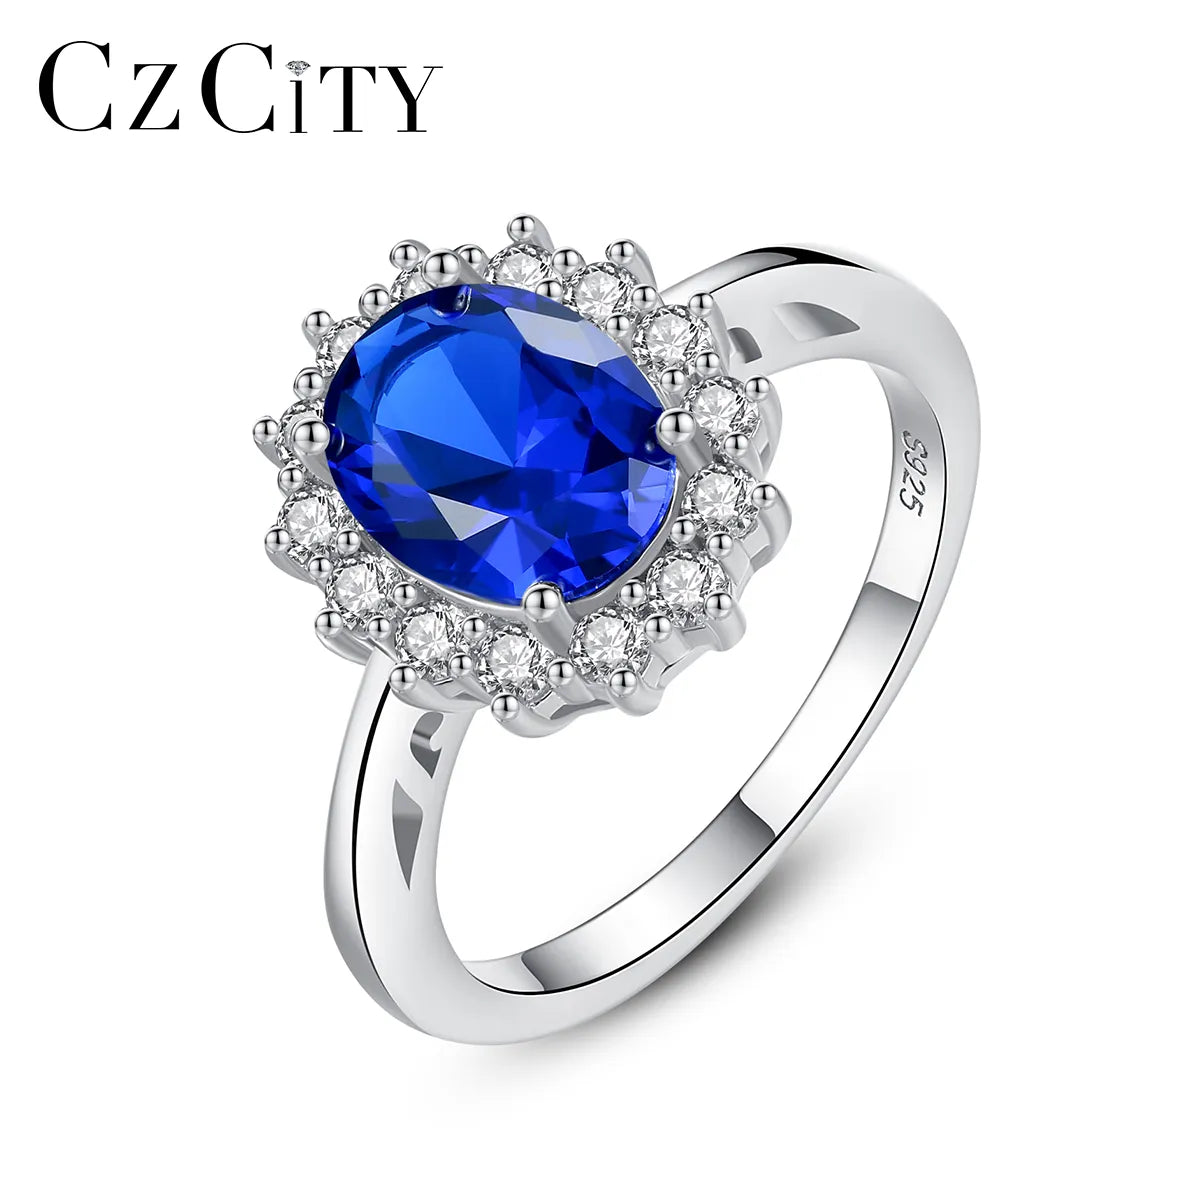 Czcity Synthetic Gemstone Sapphire 925 Sterling Silver Rings For Women Luxury Diana Princess Wedding Bridal Charm Fine Jewellery